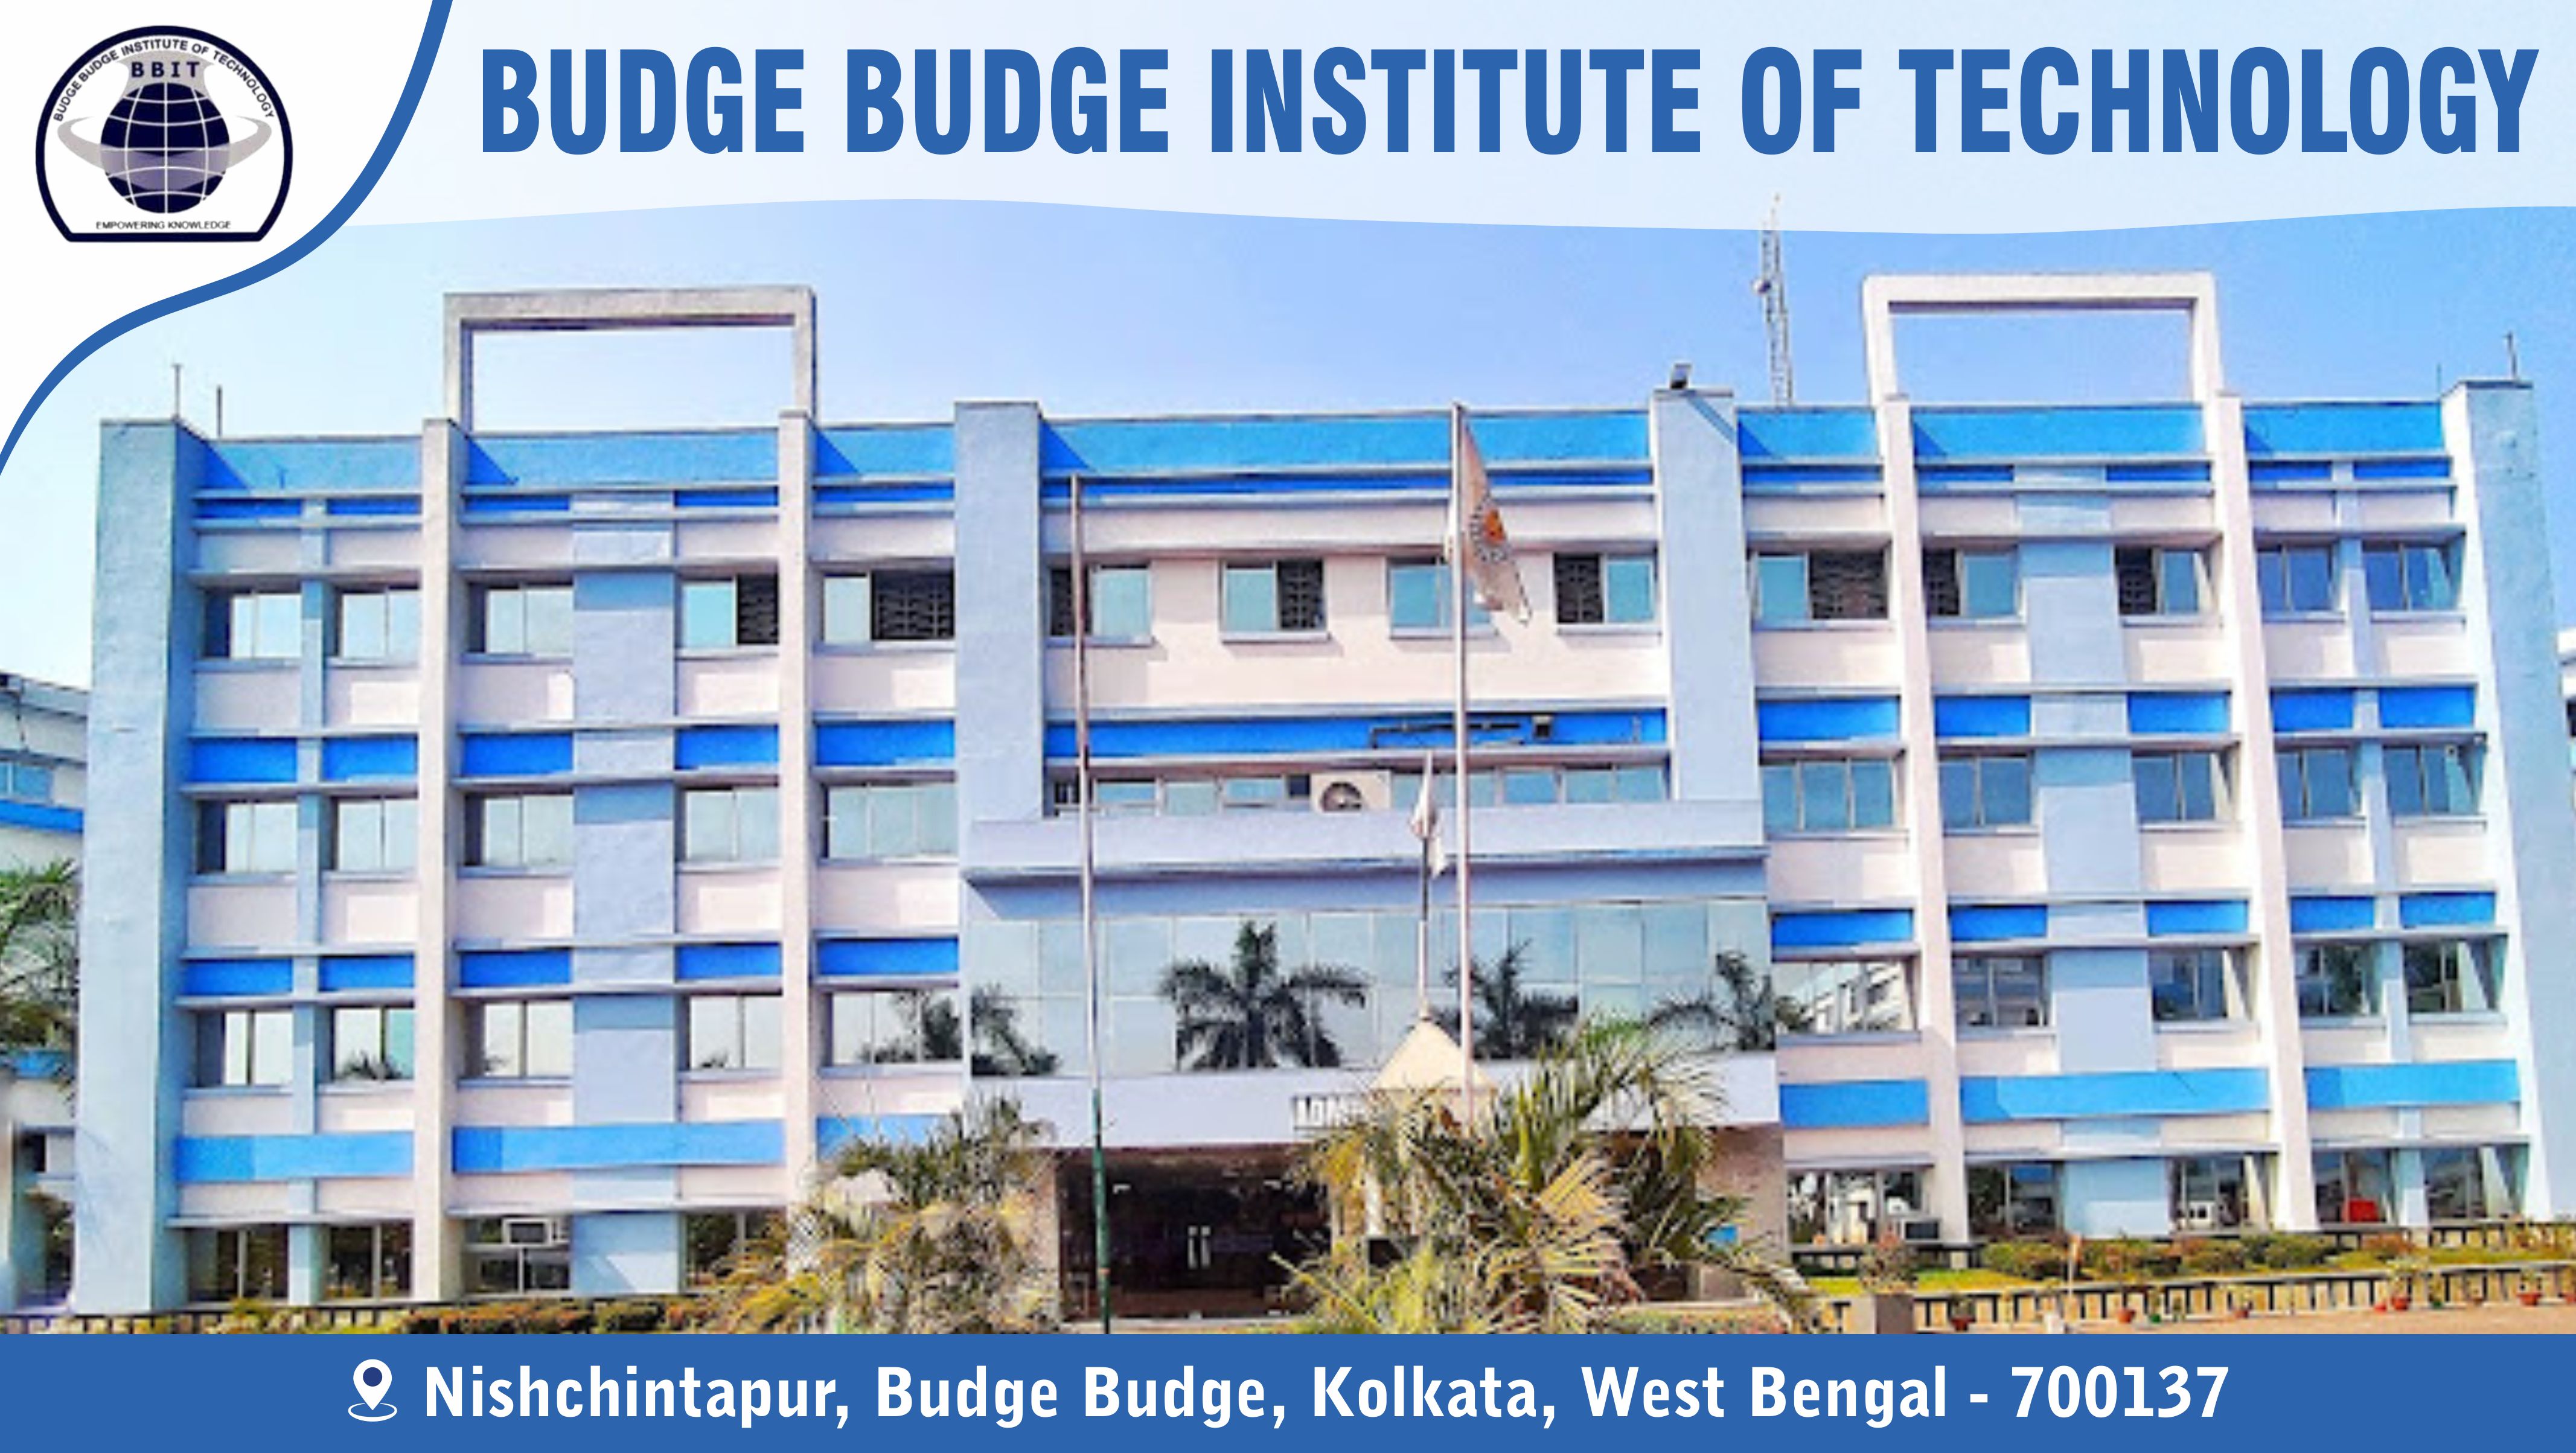 Out Side View of Budge Budge Institute of Technology